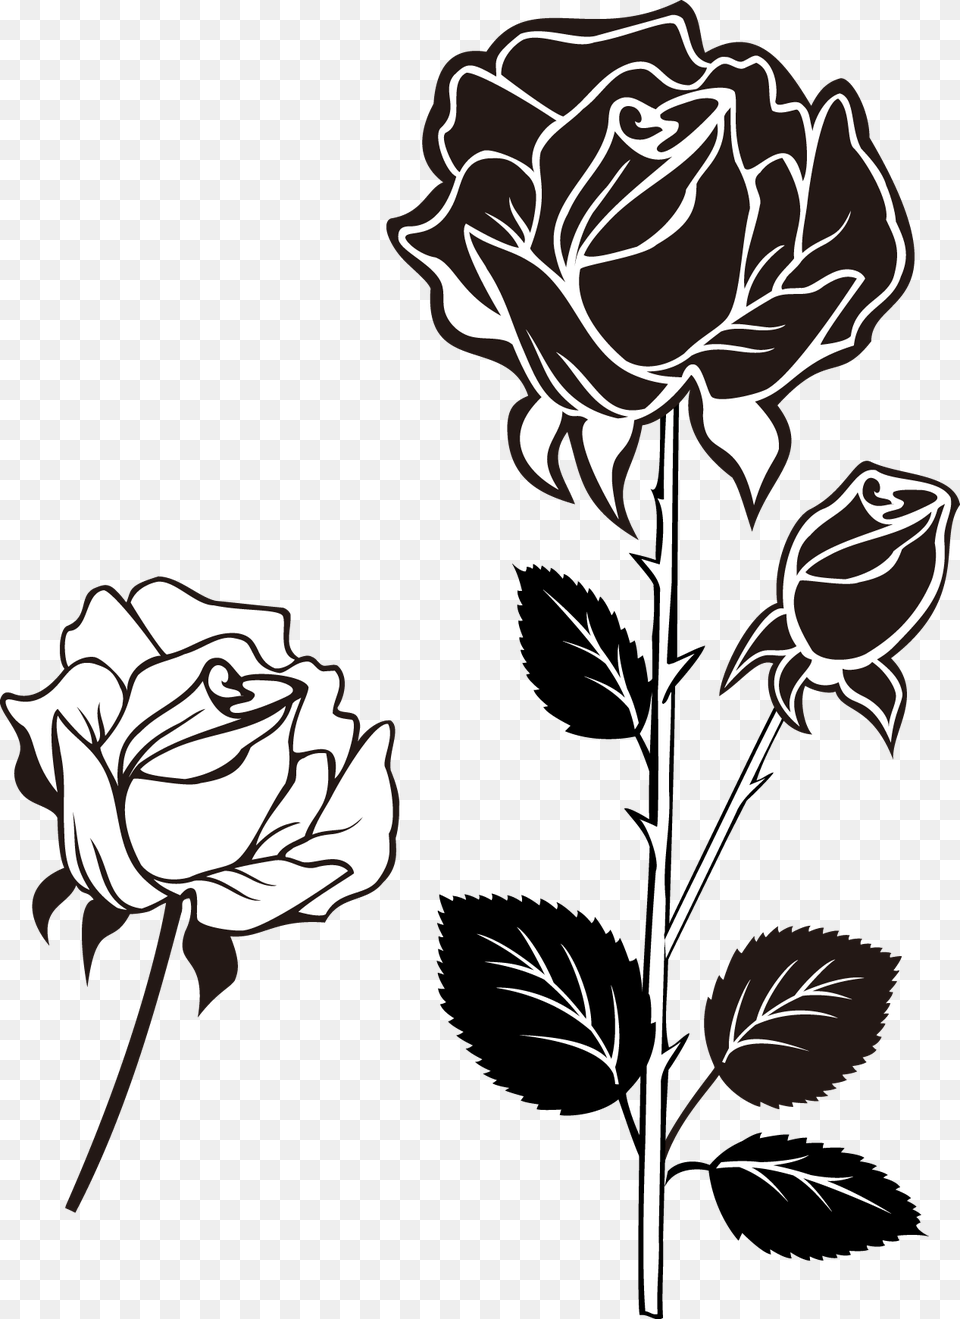 Black White Rose Search Result 72 Cliparts For Black Rosa Preta E Branca, Flower, Plant, Art, Drawing Png Image